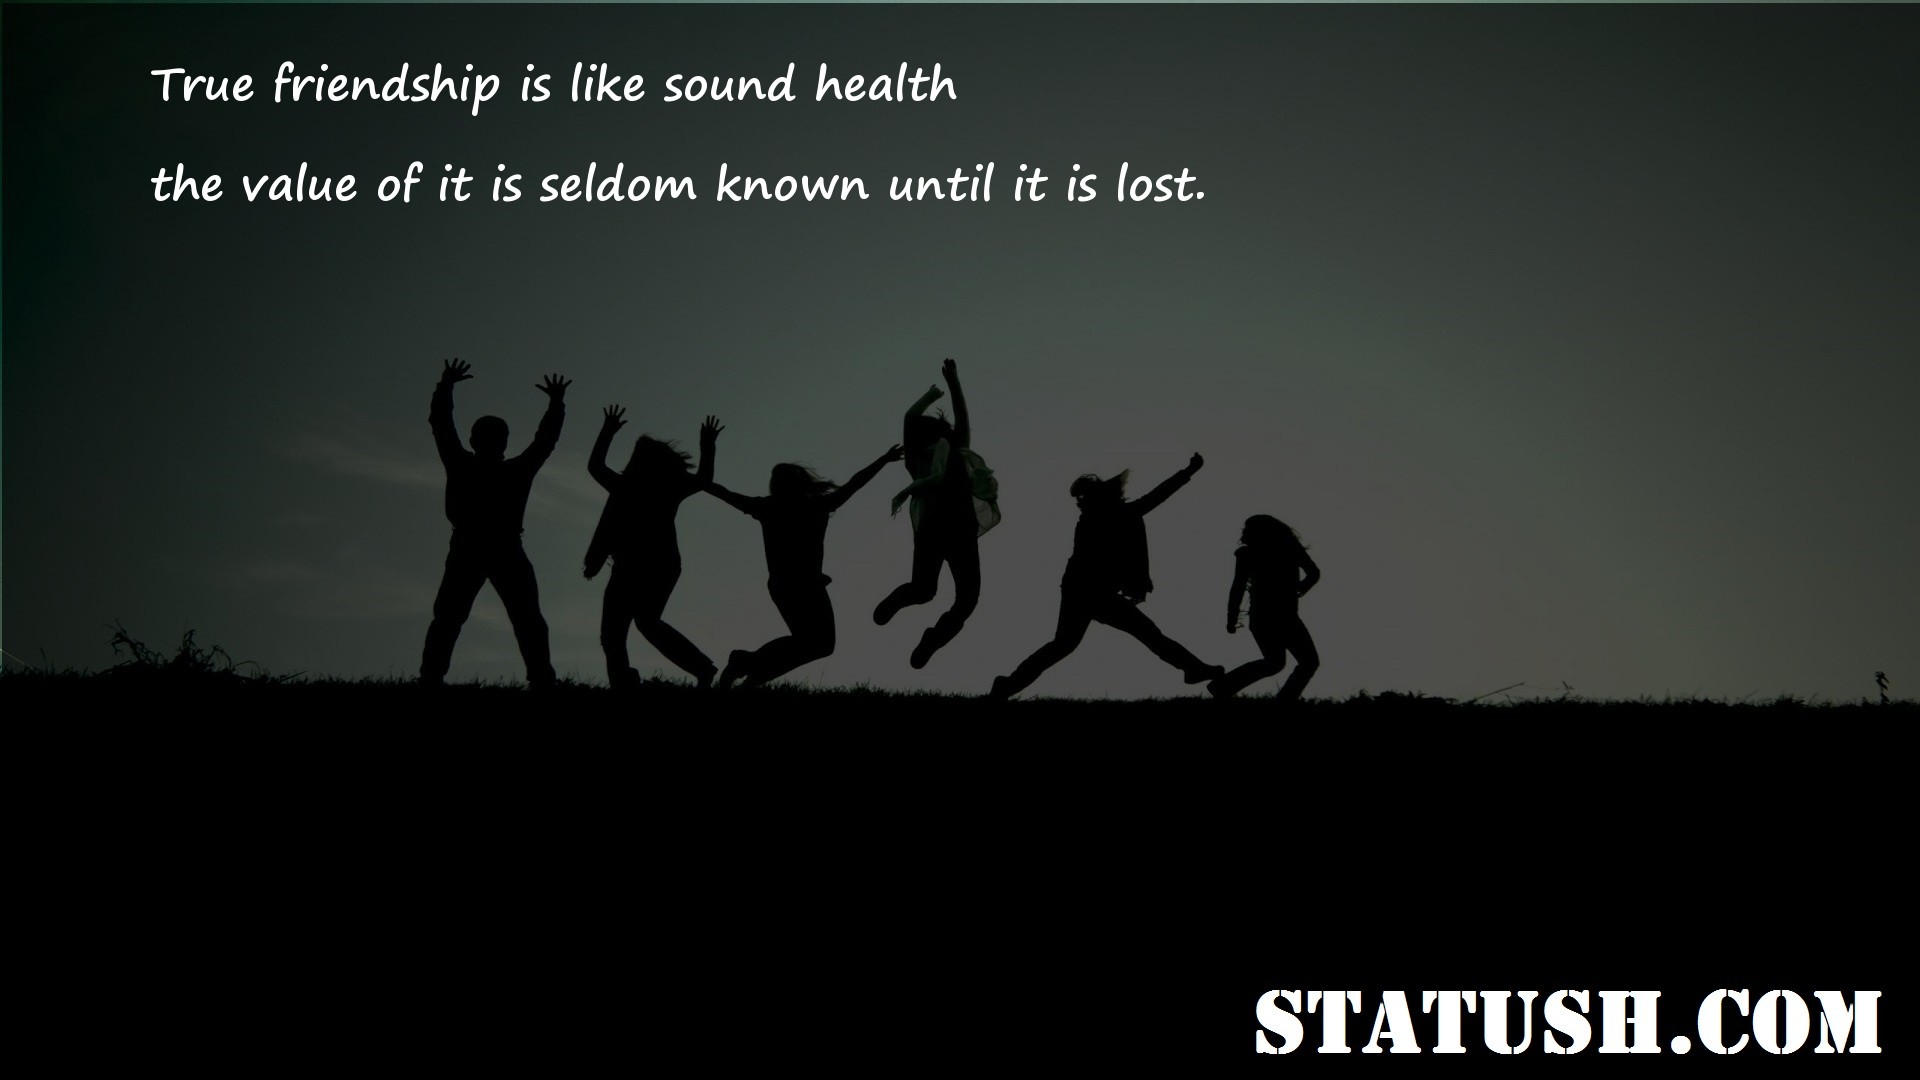 True friendship is like sound health Friendship Quotes at statush.com